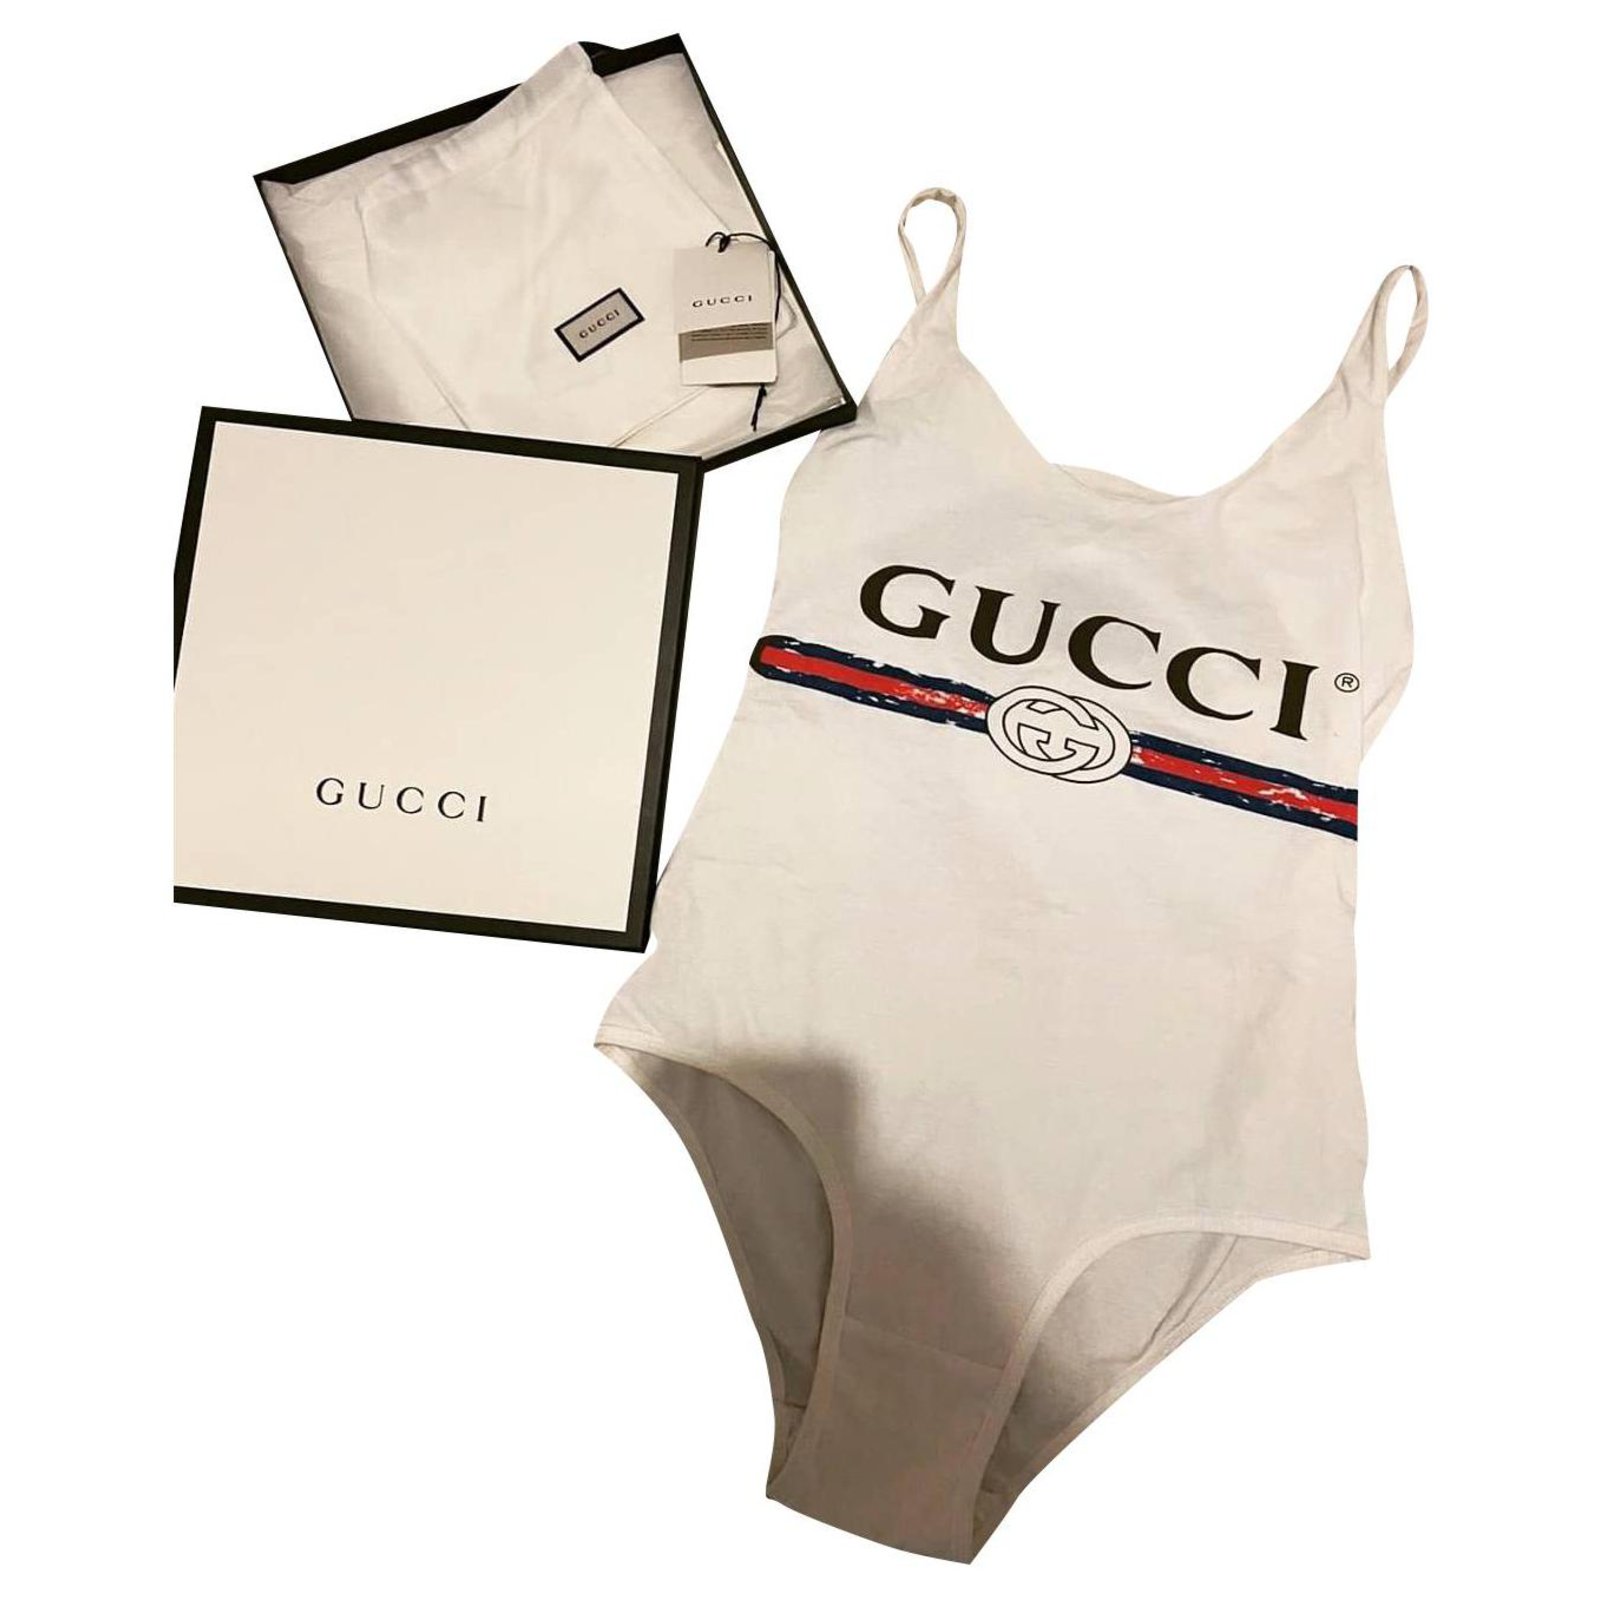 white gucci swimsuit